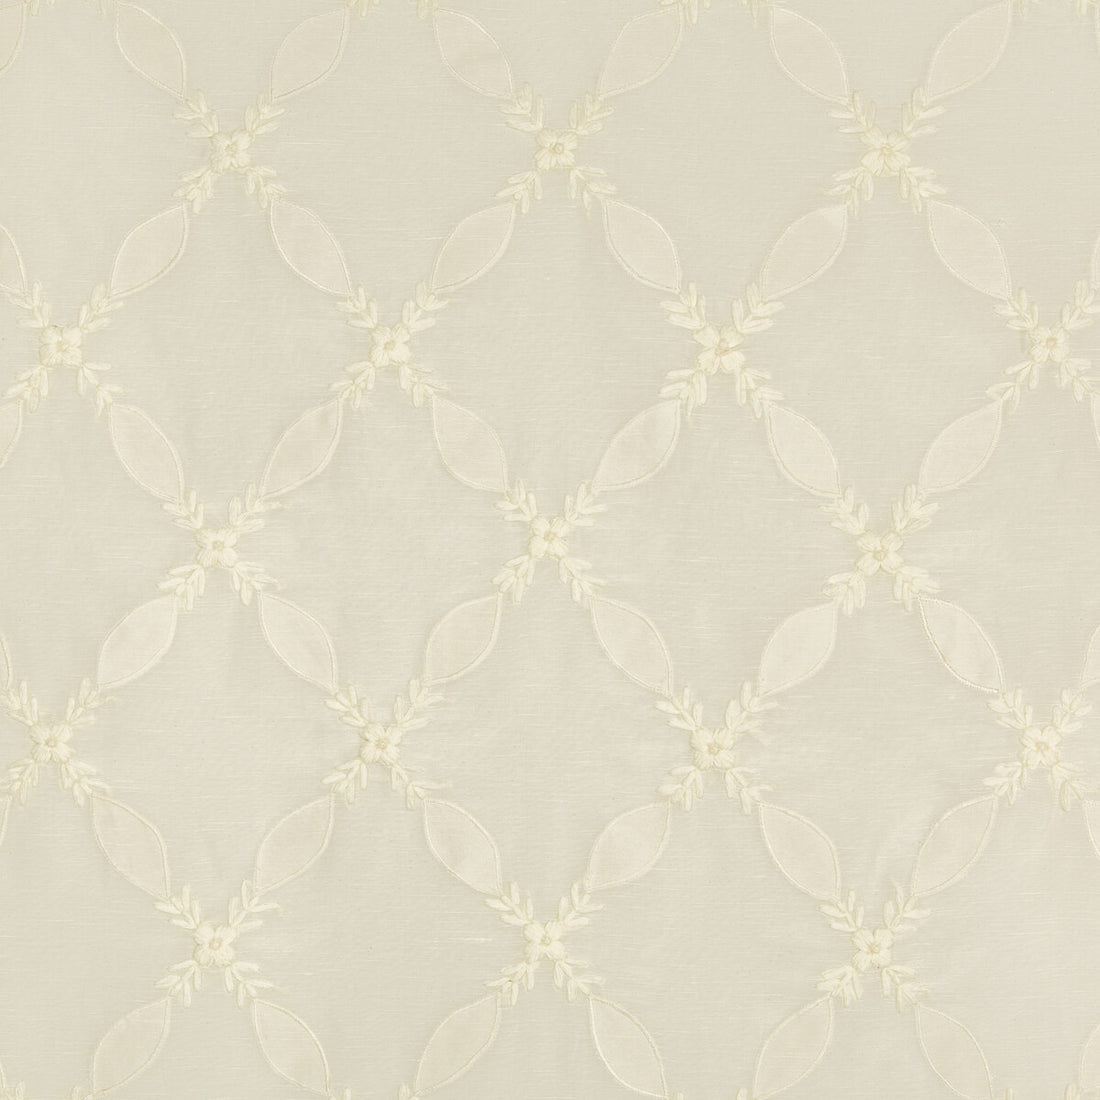 Oliveira Sheer fabric in white color - pattern 8017114.101.0 - by Brunschwig &amp; Fils in the Le Parnasse collection